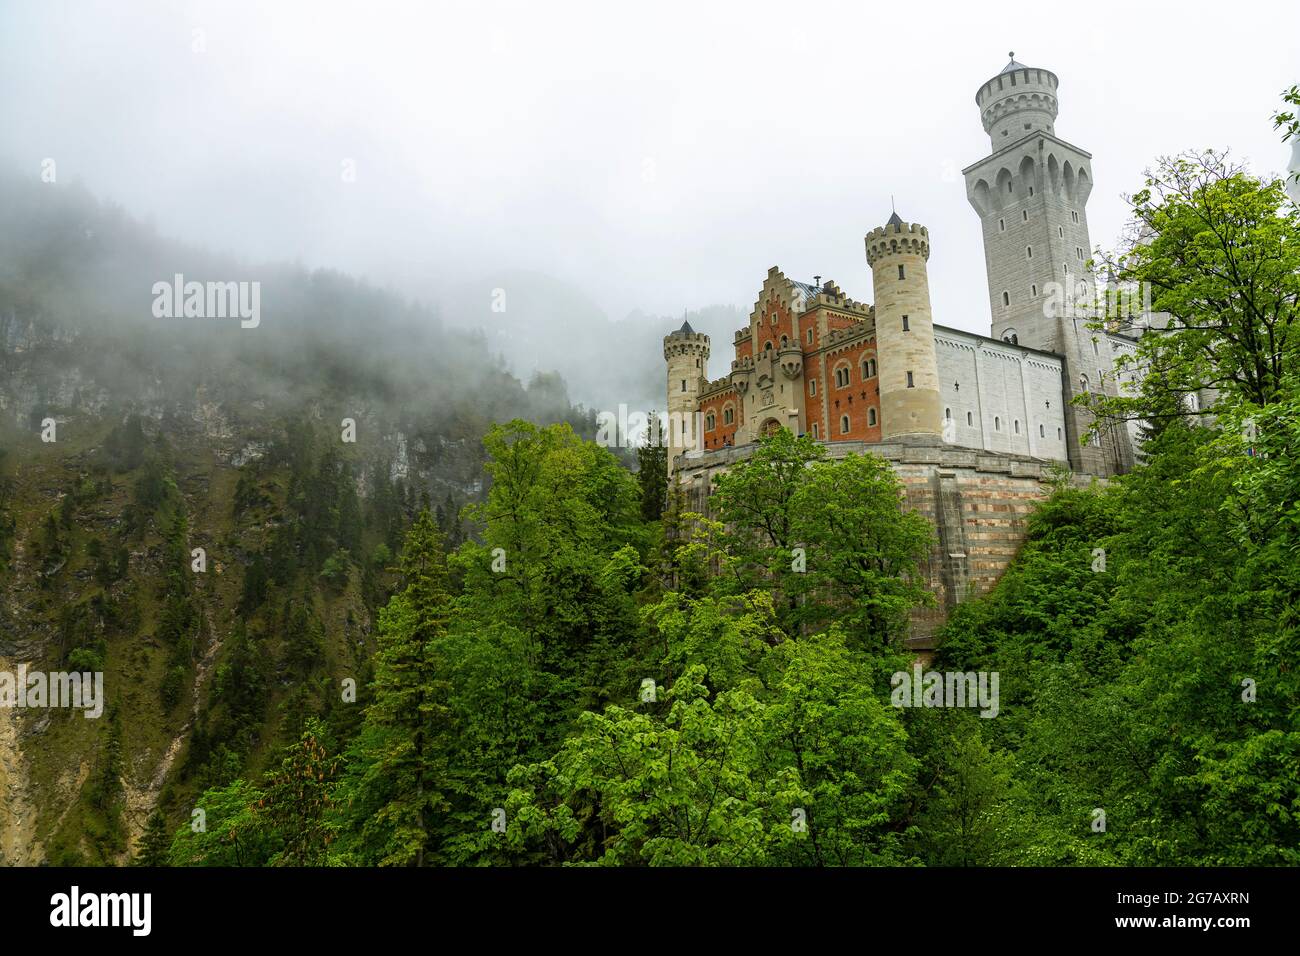 View of Neuschwanstein Castle with clouds and green forests, Schwangau, Upper Bavaria, Germany Stock Photo